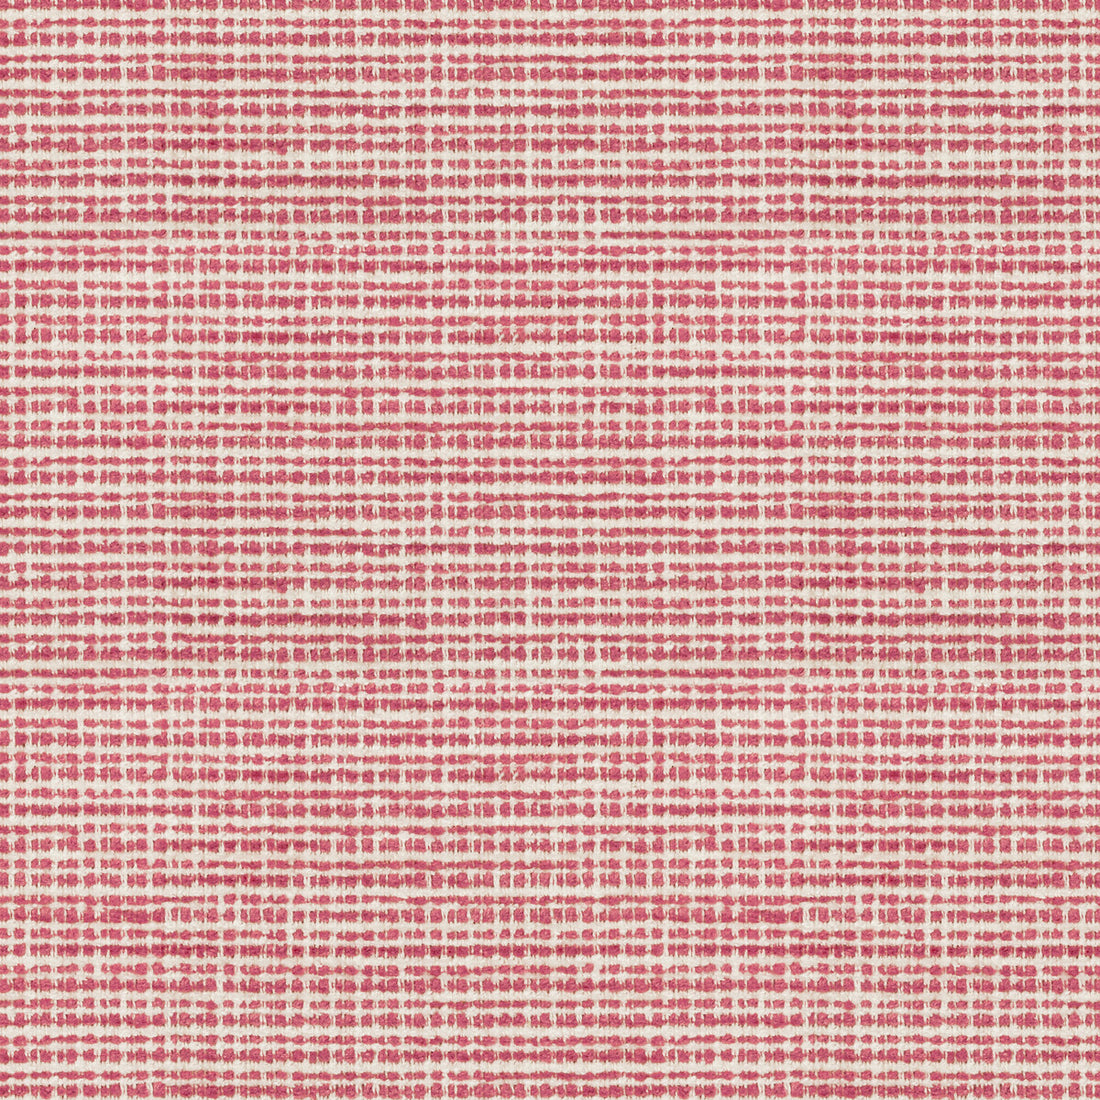 Freney Texture fabric in pink color - pattern 8019149.7.0 - by Brunschwig &amp; Fils in the Chambery Textures II collection